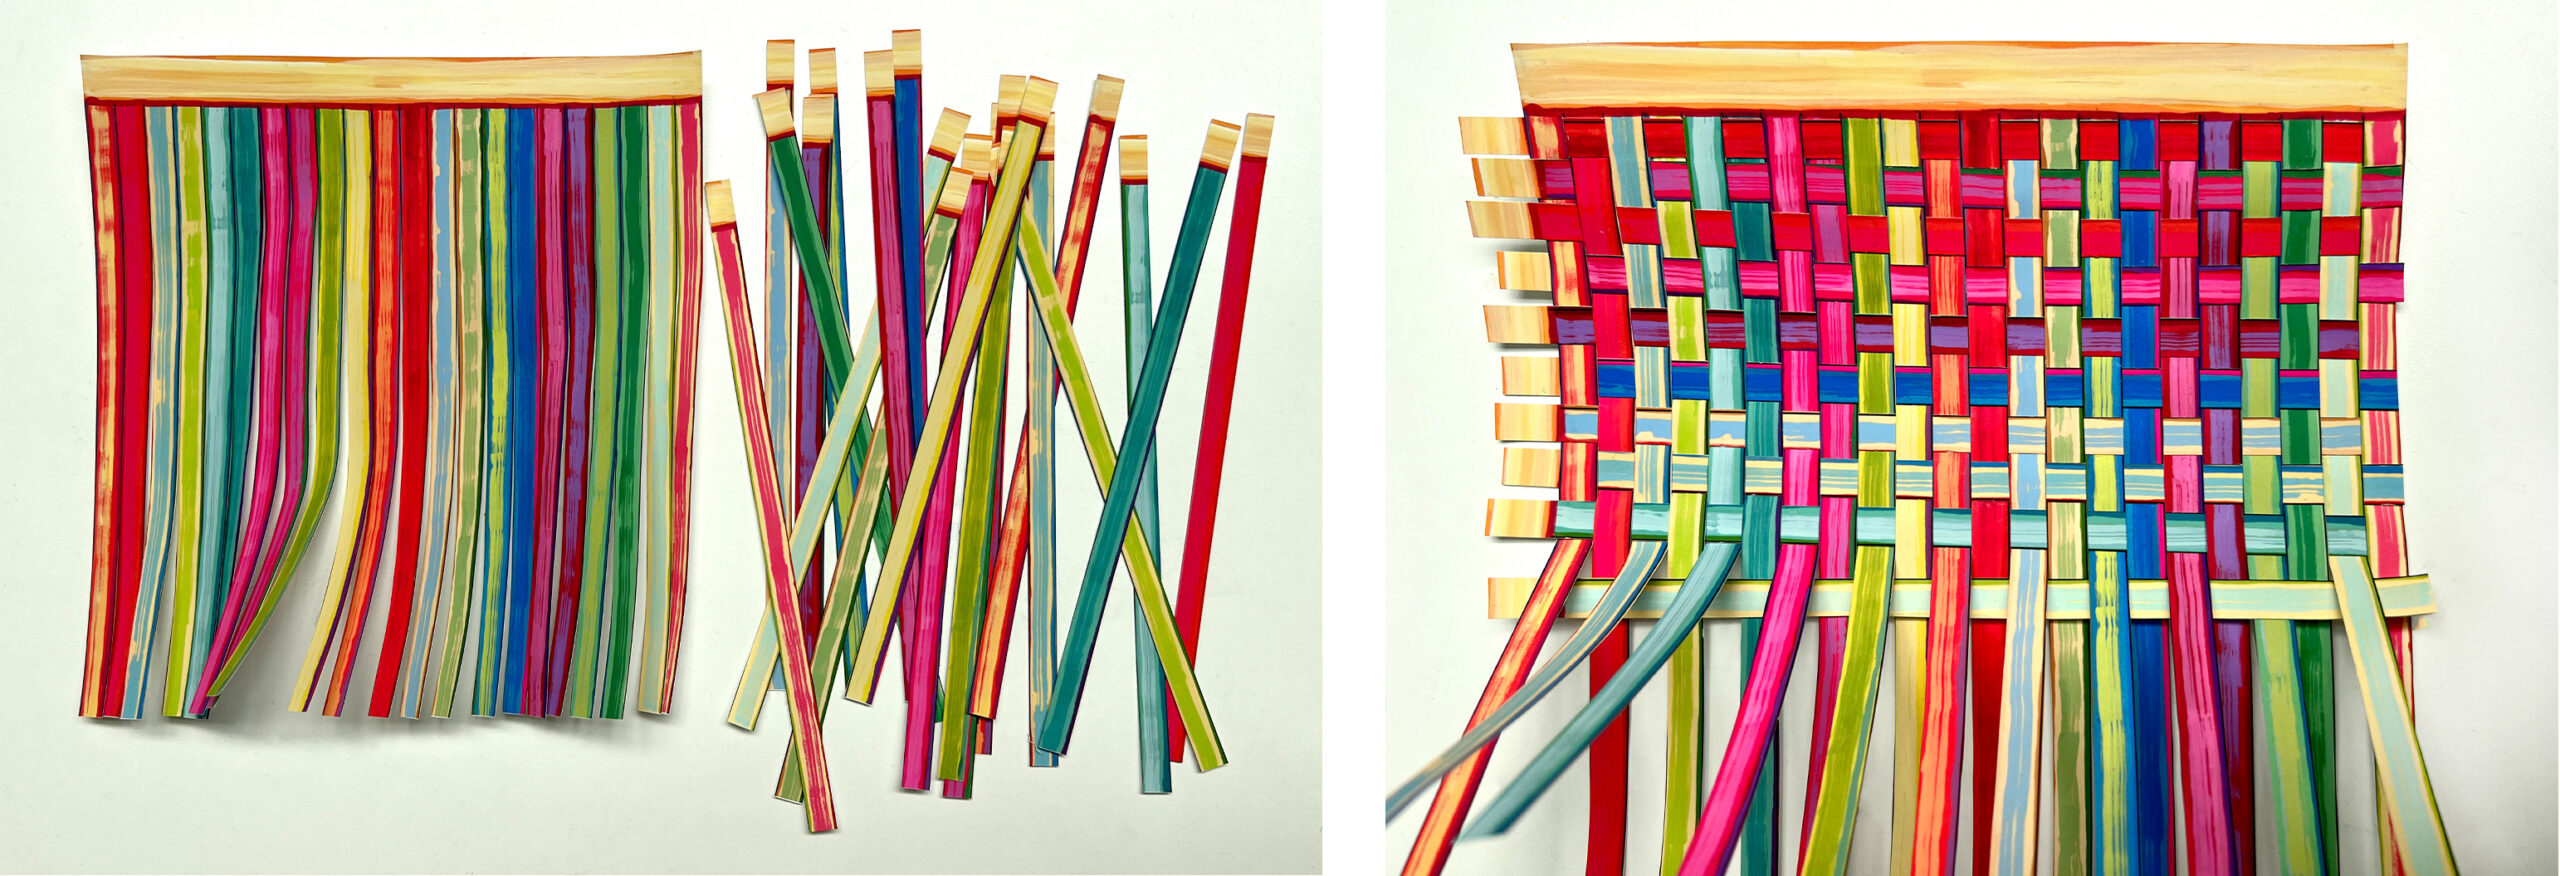 image of sheets of colorful woven strips of paper, on the left they are cut up and on the right they are woven into a flat mat